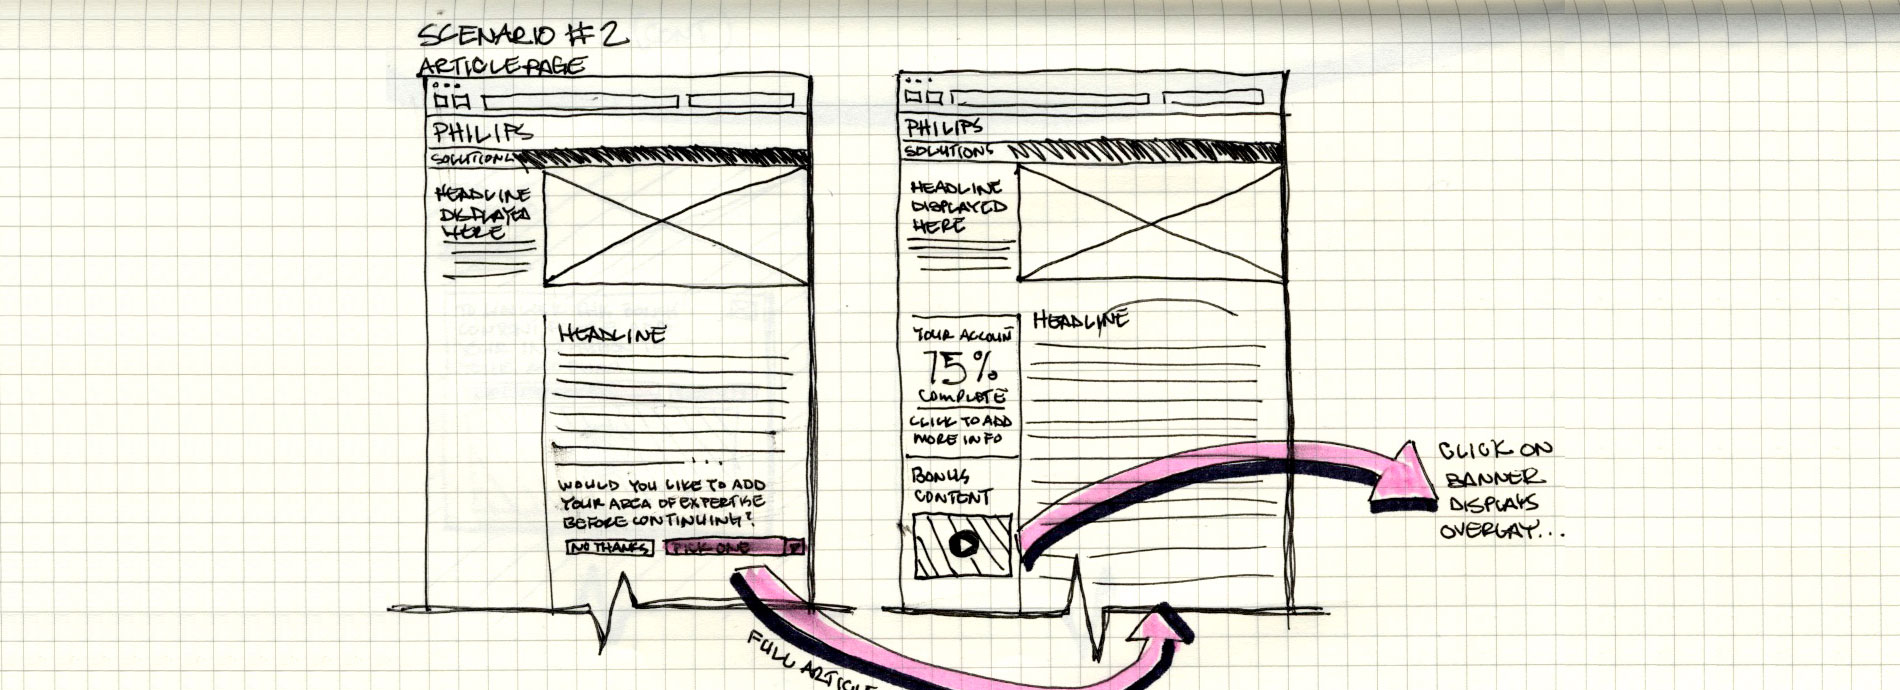 Scan of UX paper sketches